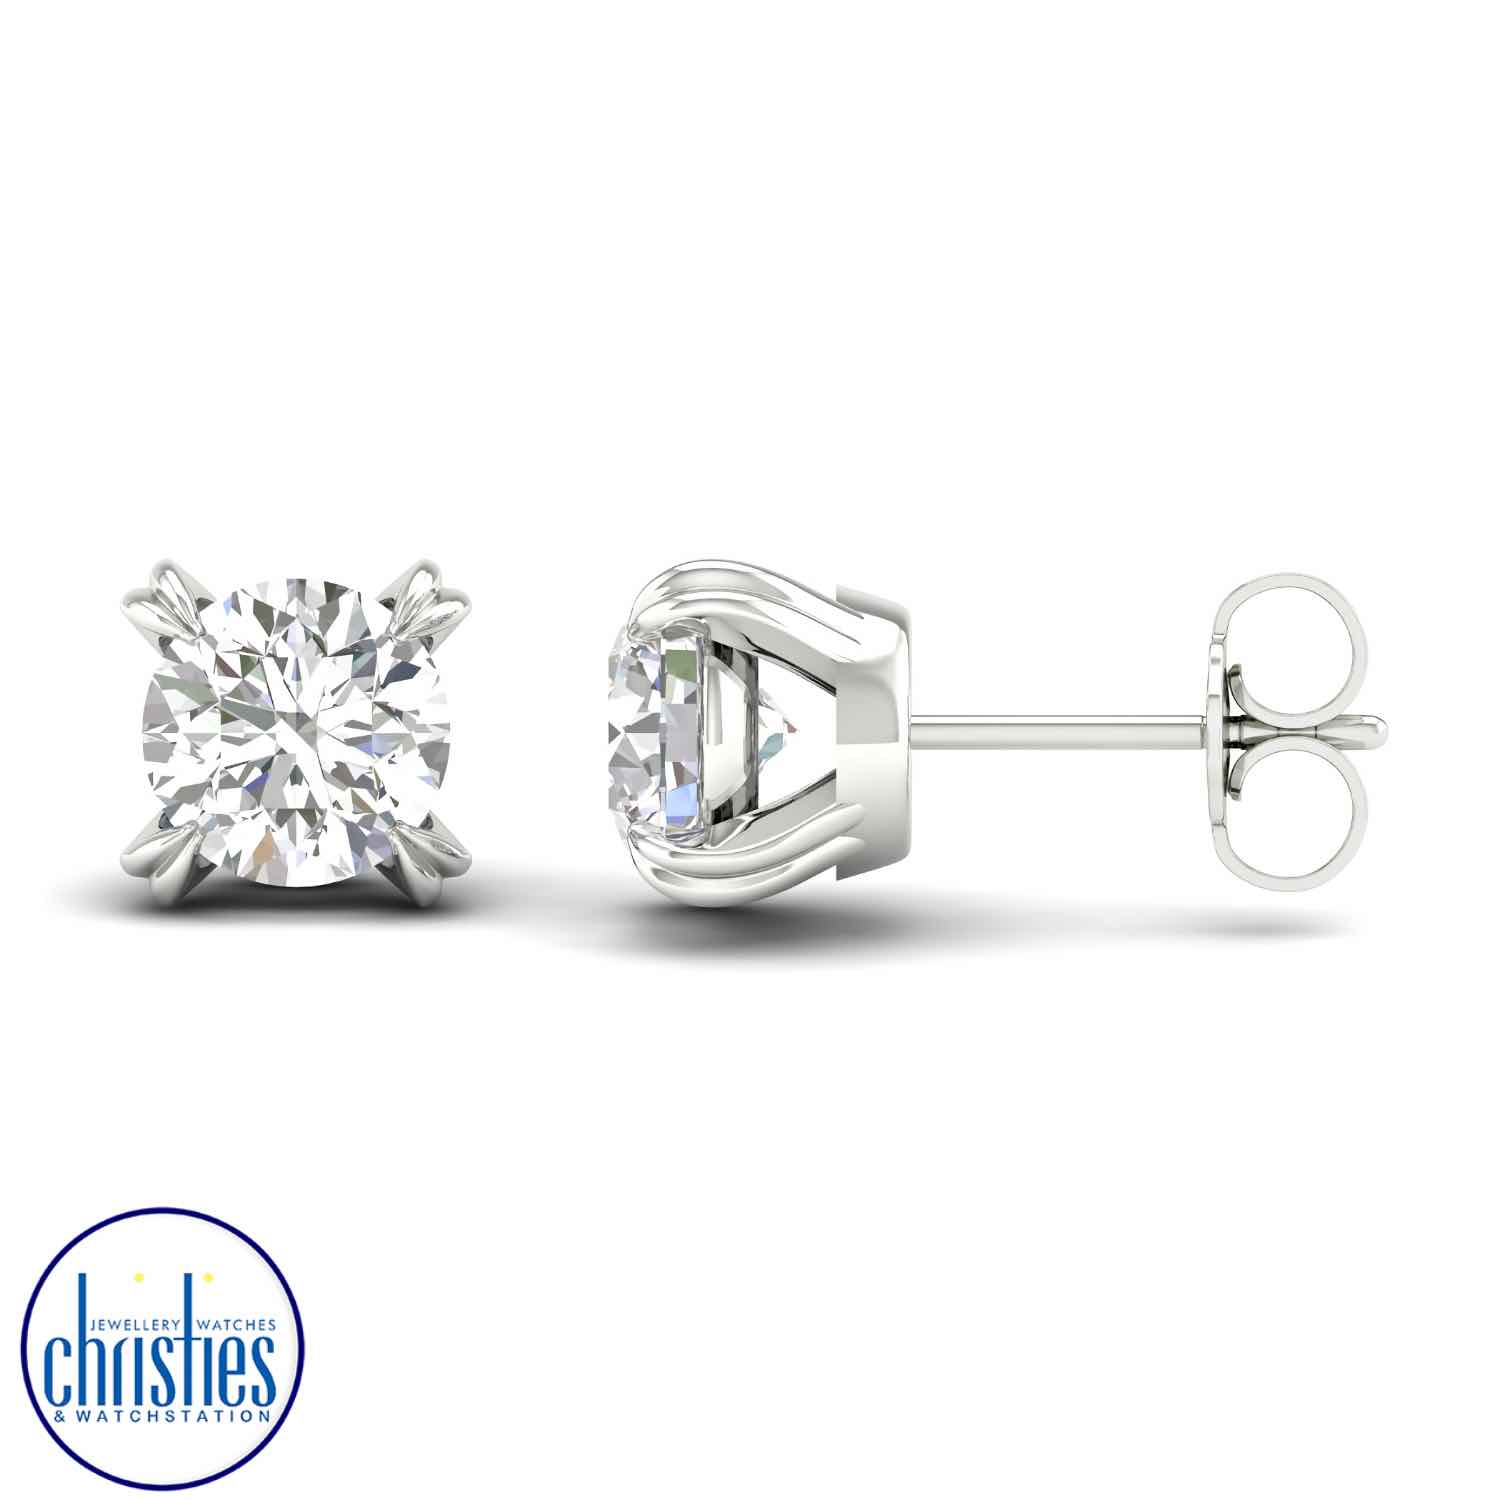 18ct White Gold Diamond Stud Earrings 1.00ct TDW solitaire diamond necklace nz